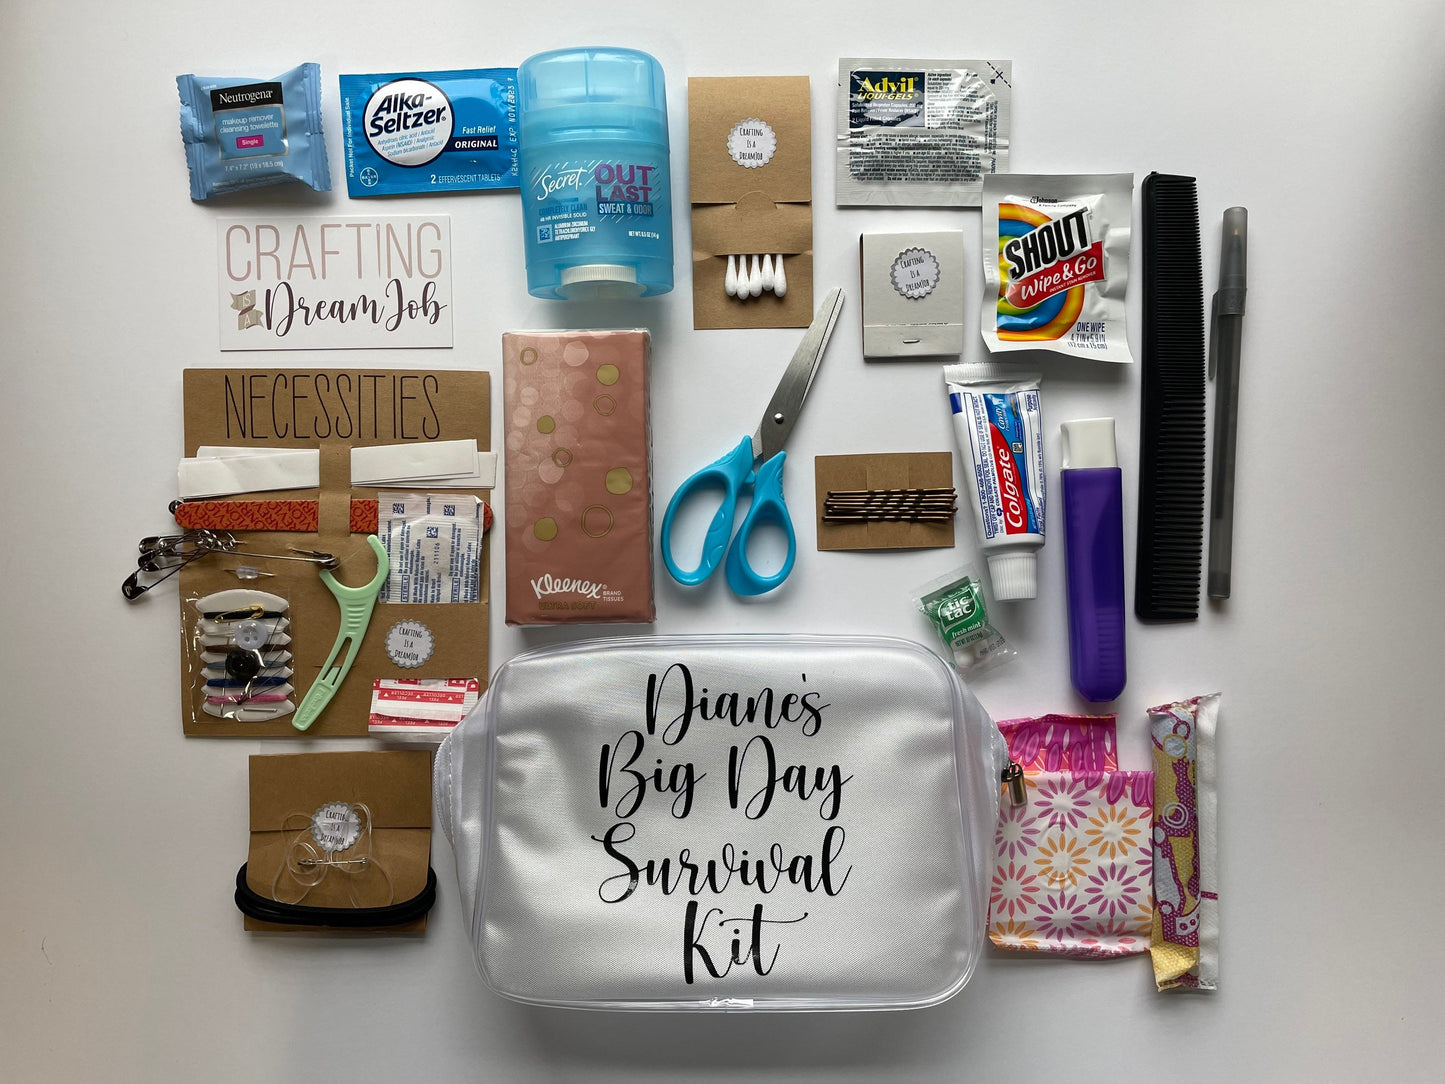 What To Include In Your Wedding Day Emergency Kit Story Of, 55% OFF